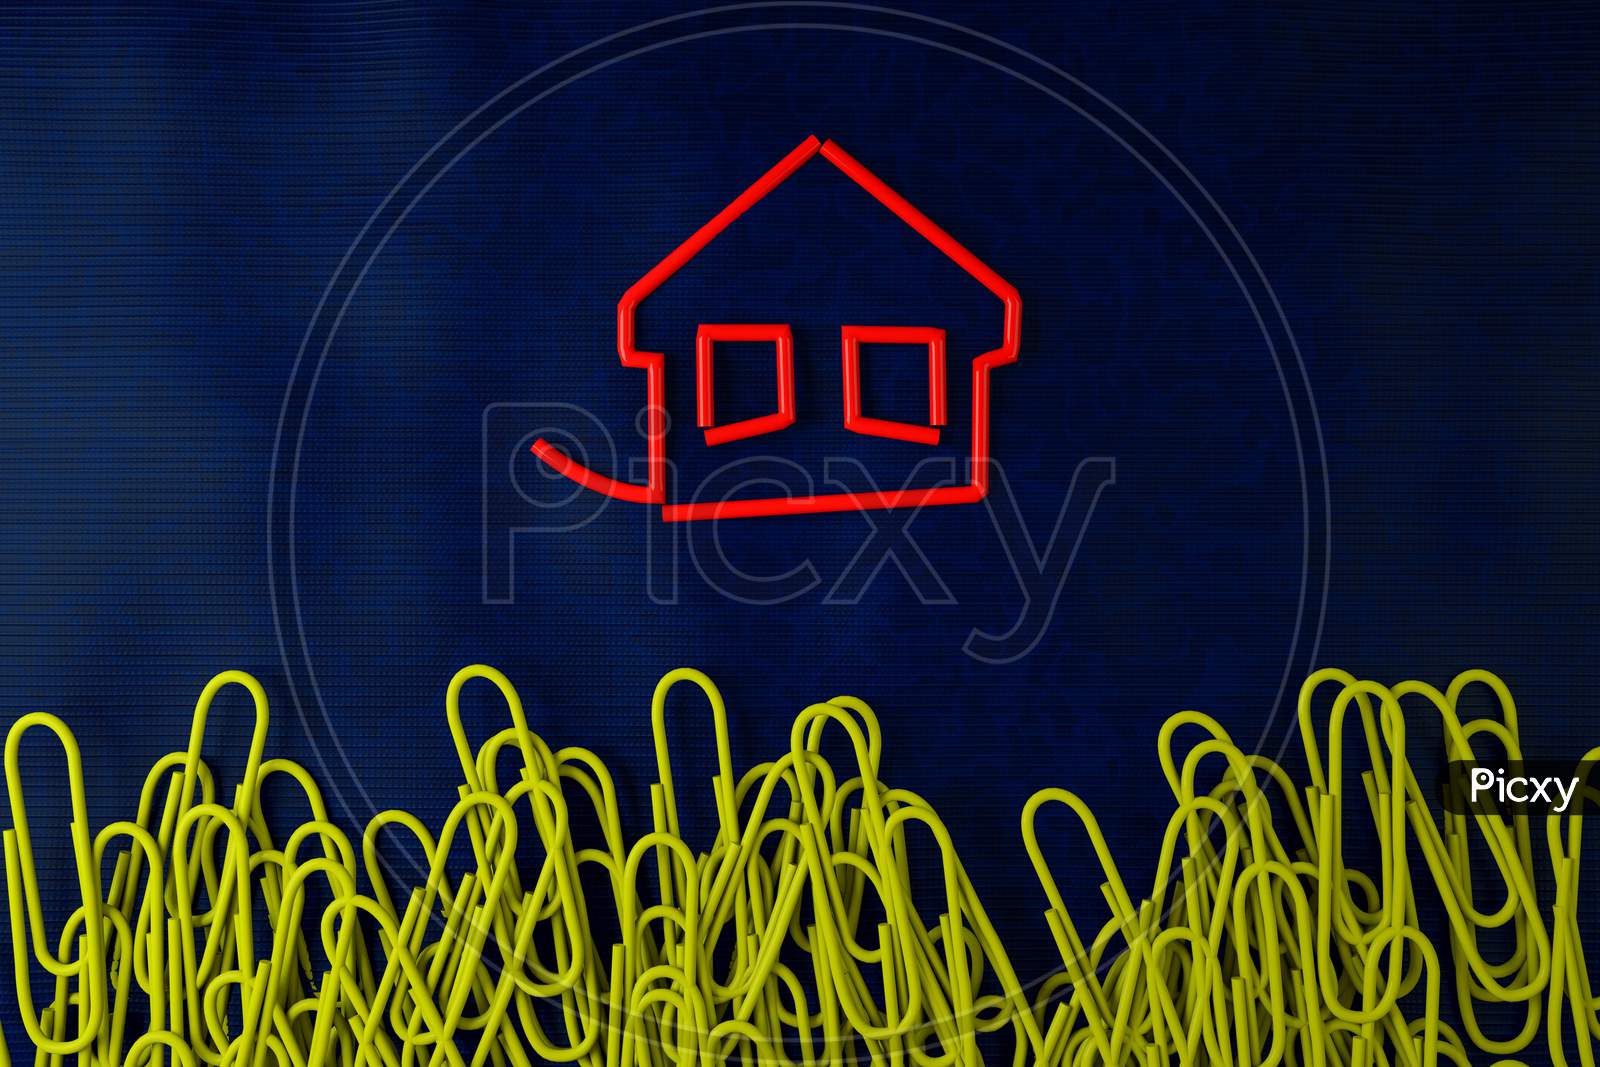 Red House Paperclip On Blue Fabric Next To Random Paperclips. Business Concept Or Standing Out From The Crowd Or Go Your Own Way Or Being Different Or Real Estate Concept. 3D Render